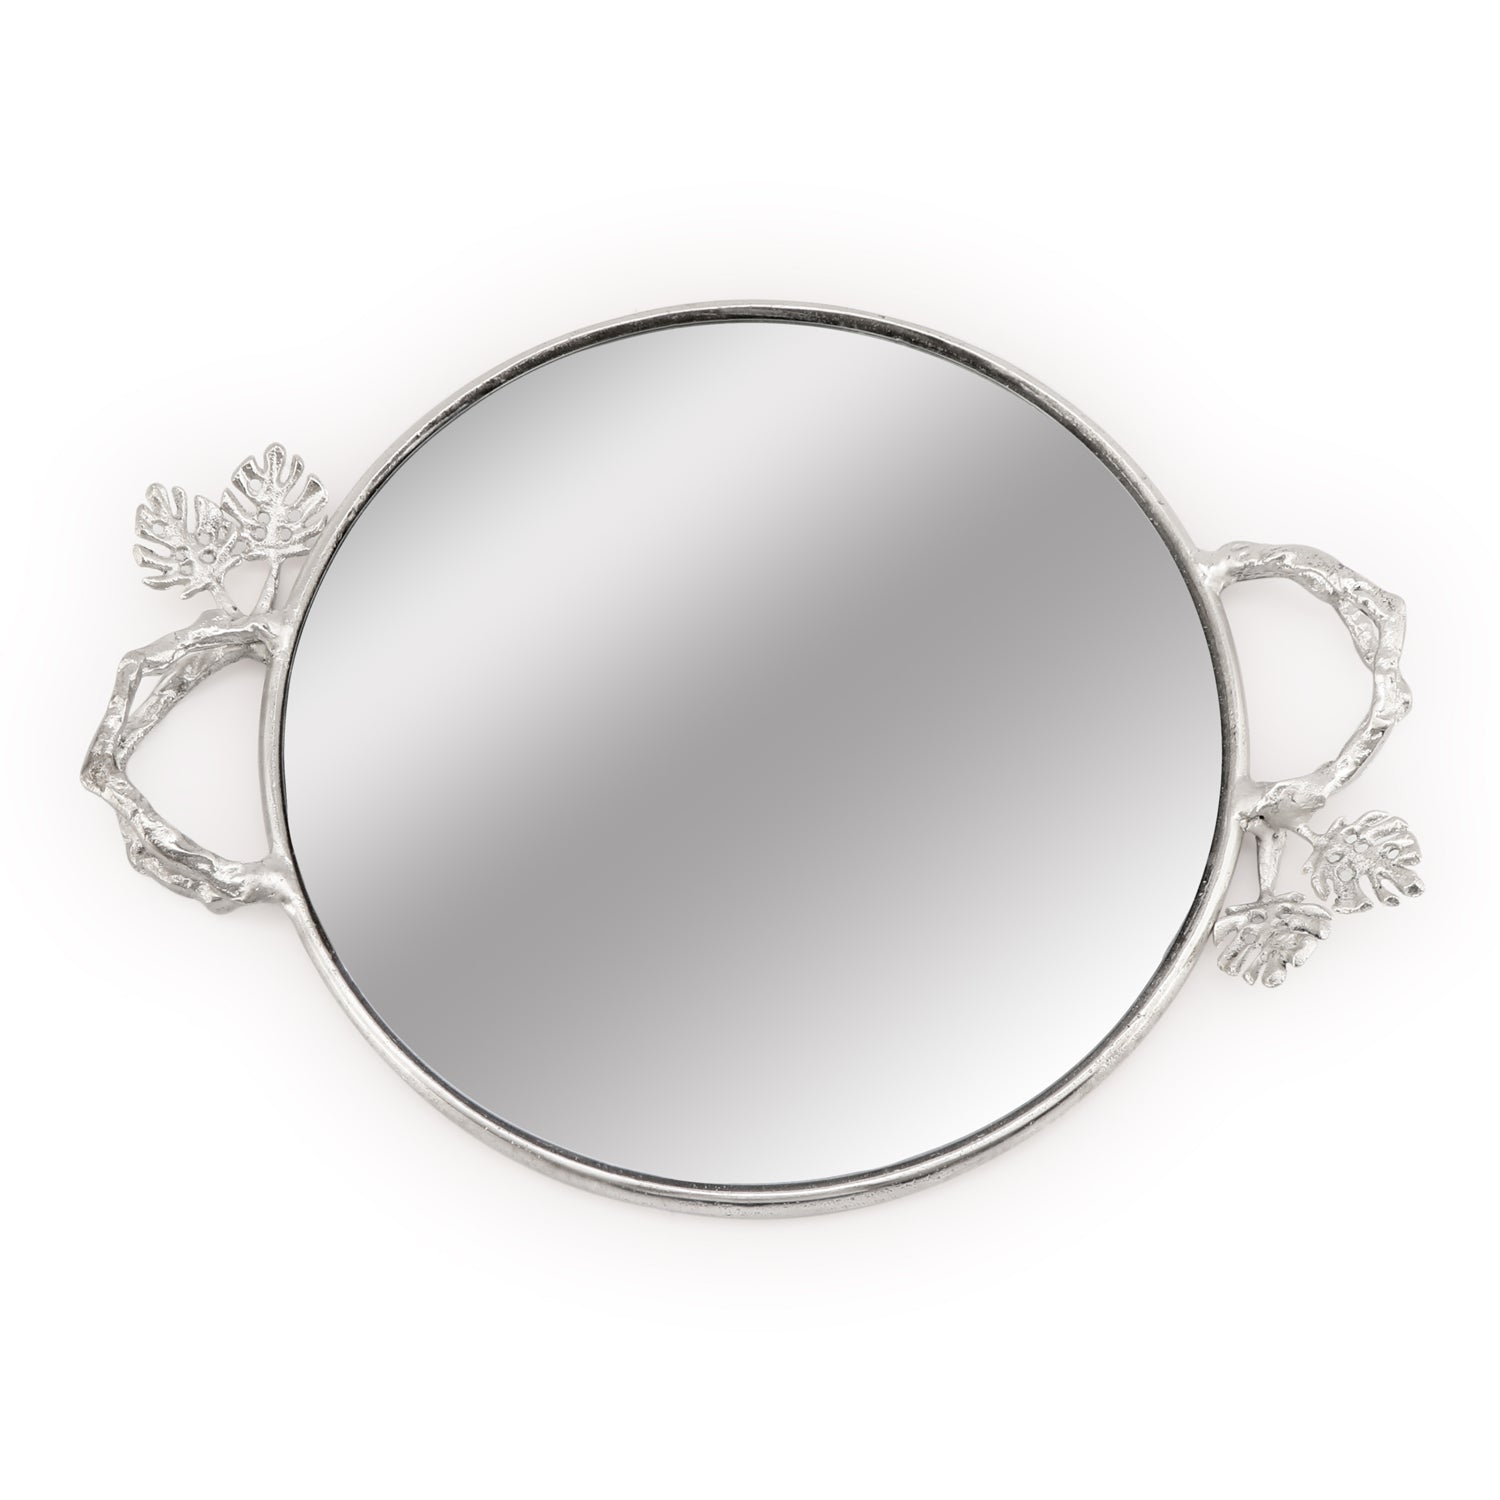 Mirror Tray - Silver Leaf 3- The Home Co.